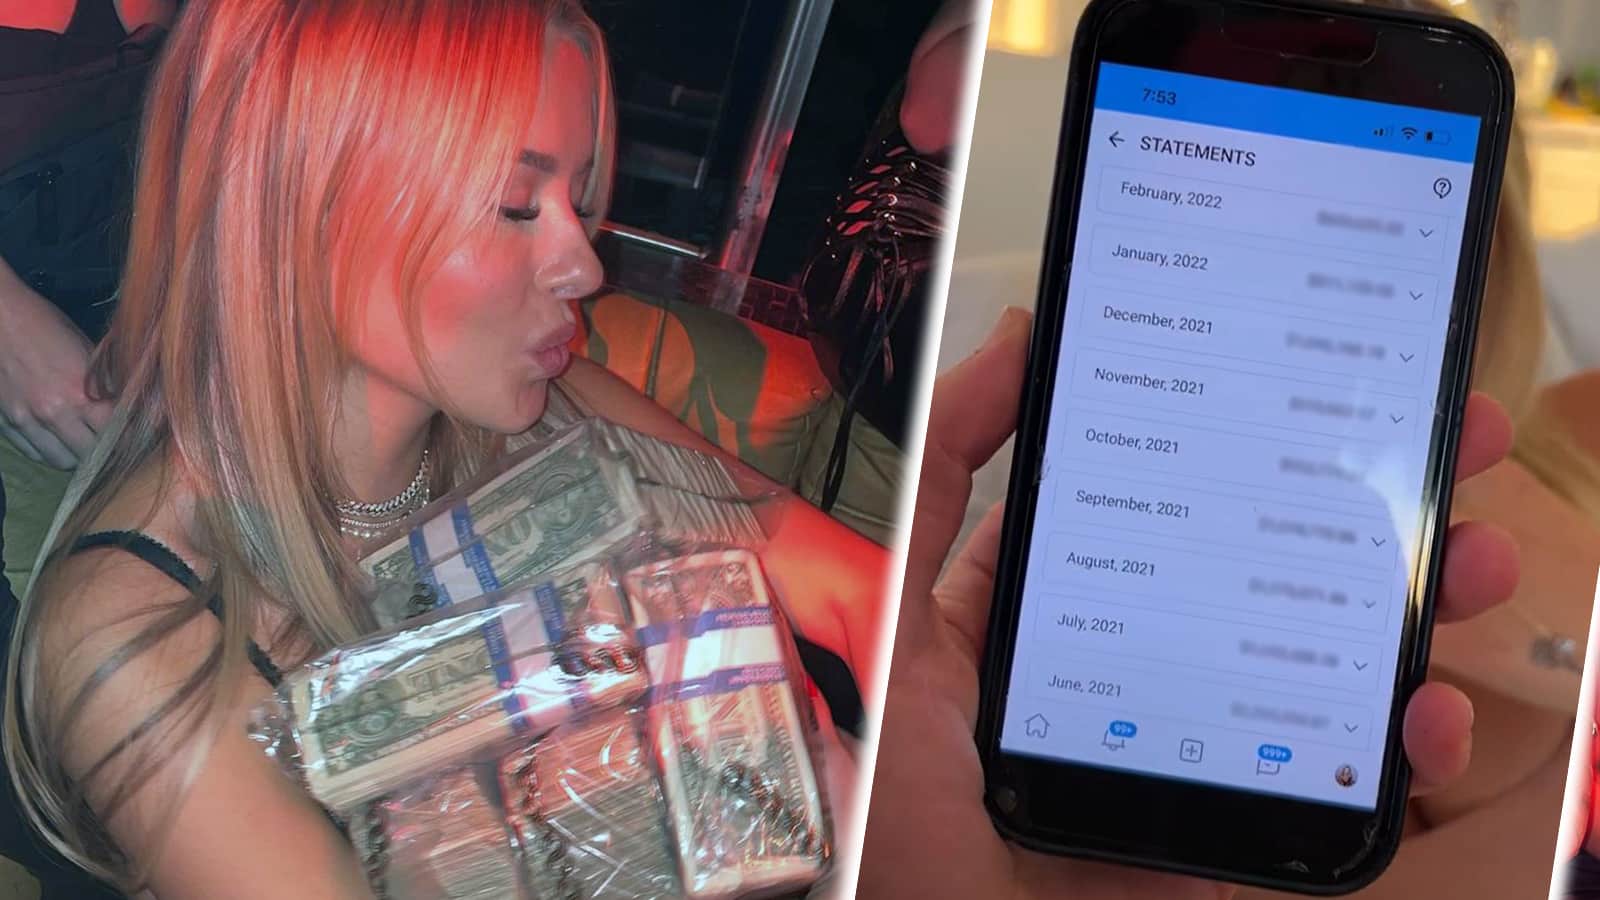 Corinna Kopf OnlyFans earnings: How much does Corinna make on OnlyFans? -  Dexerto